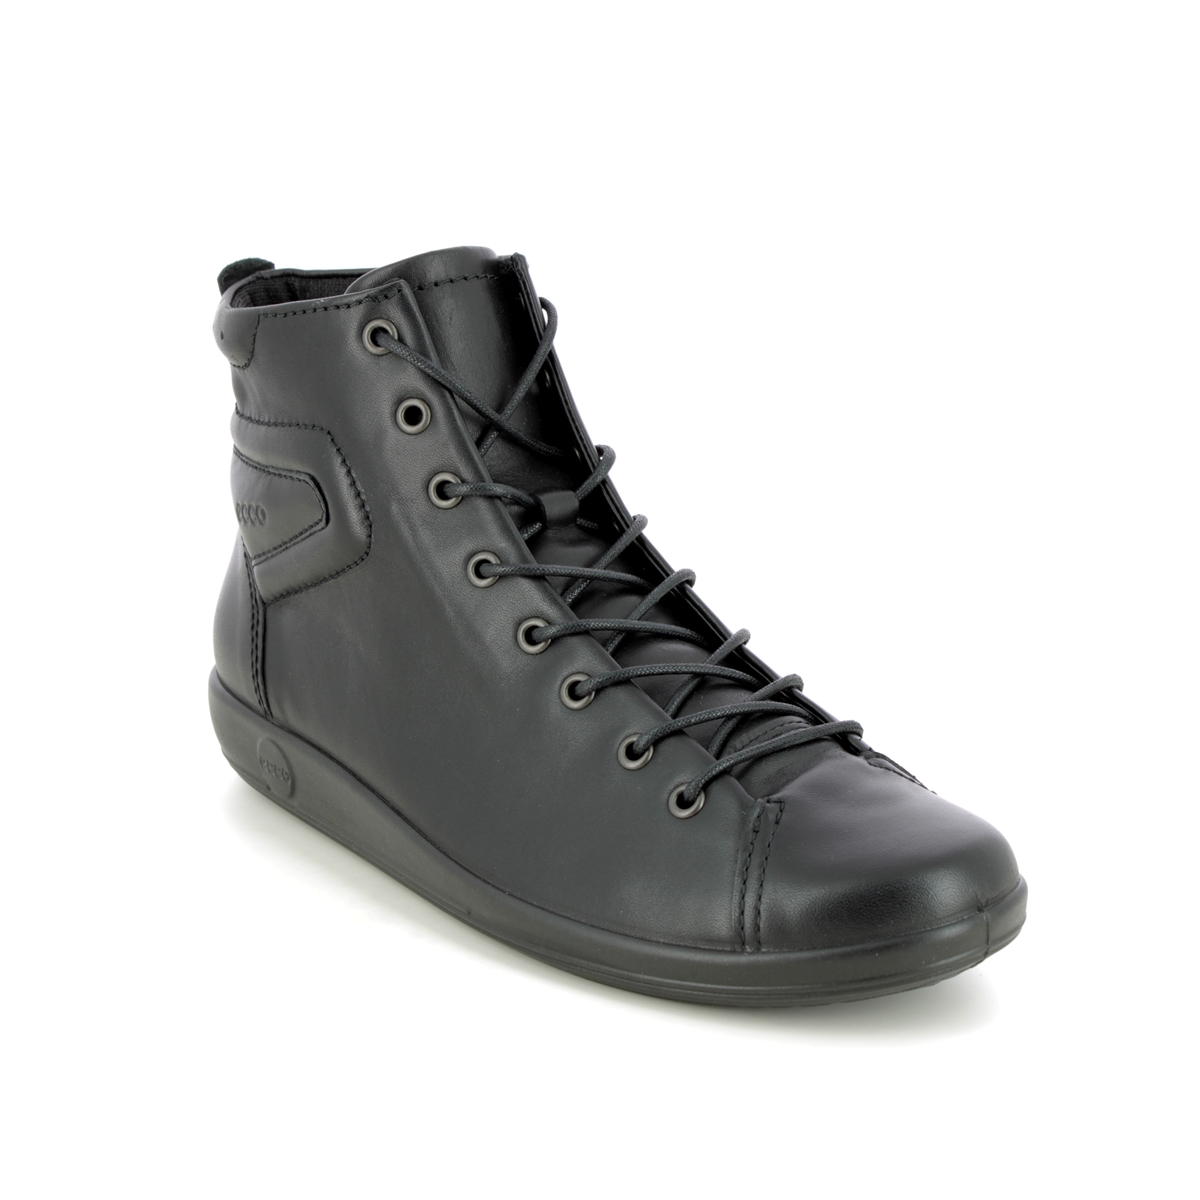 Ecco Soft 2.0 Boot Black Leather Womens Lace Up Boots 206523-56723 In Size 38 In Plain Black Leather